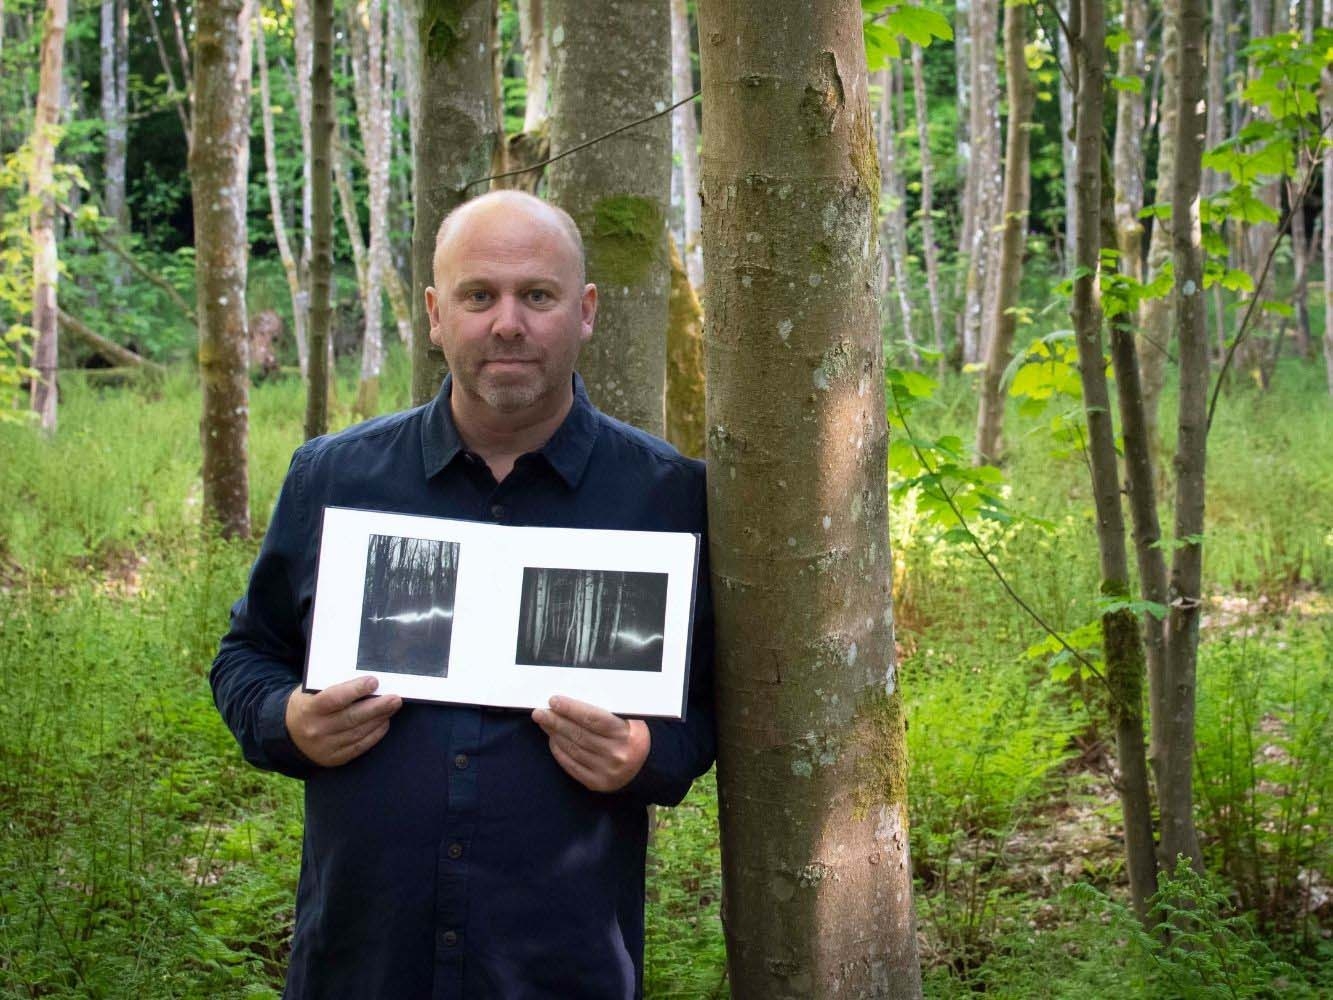 Paul Nichol standing in woodland setting holding book featuring two images